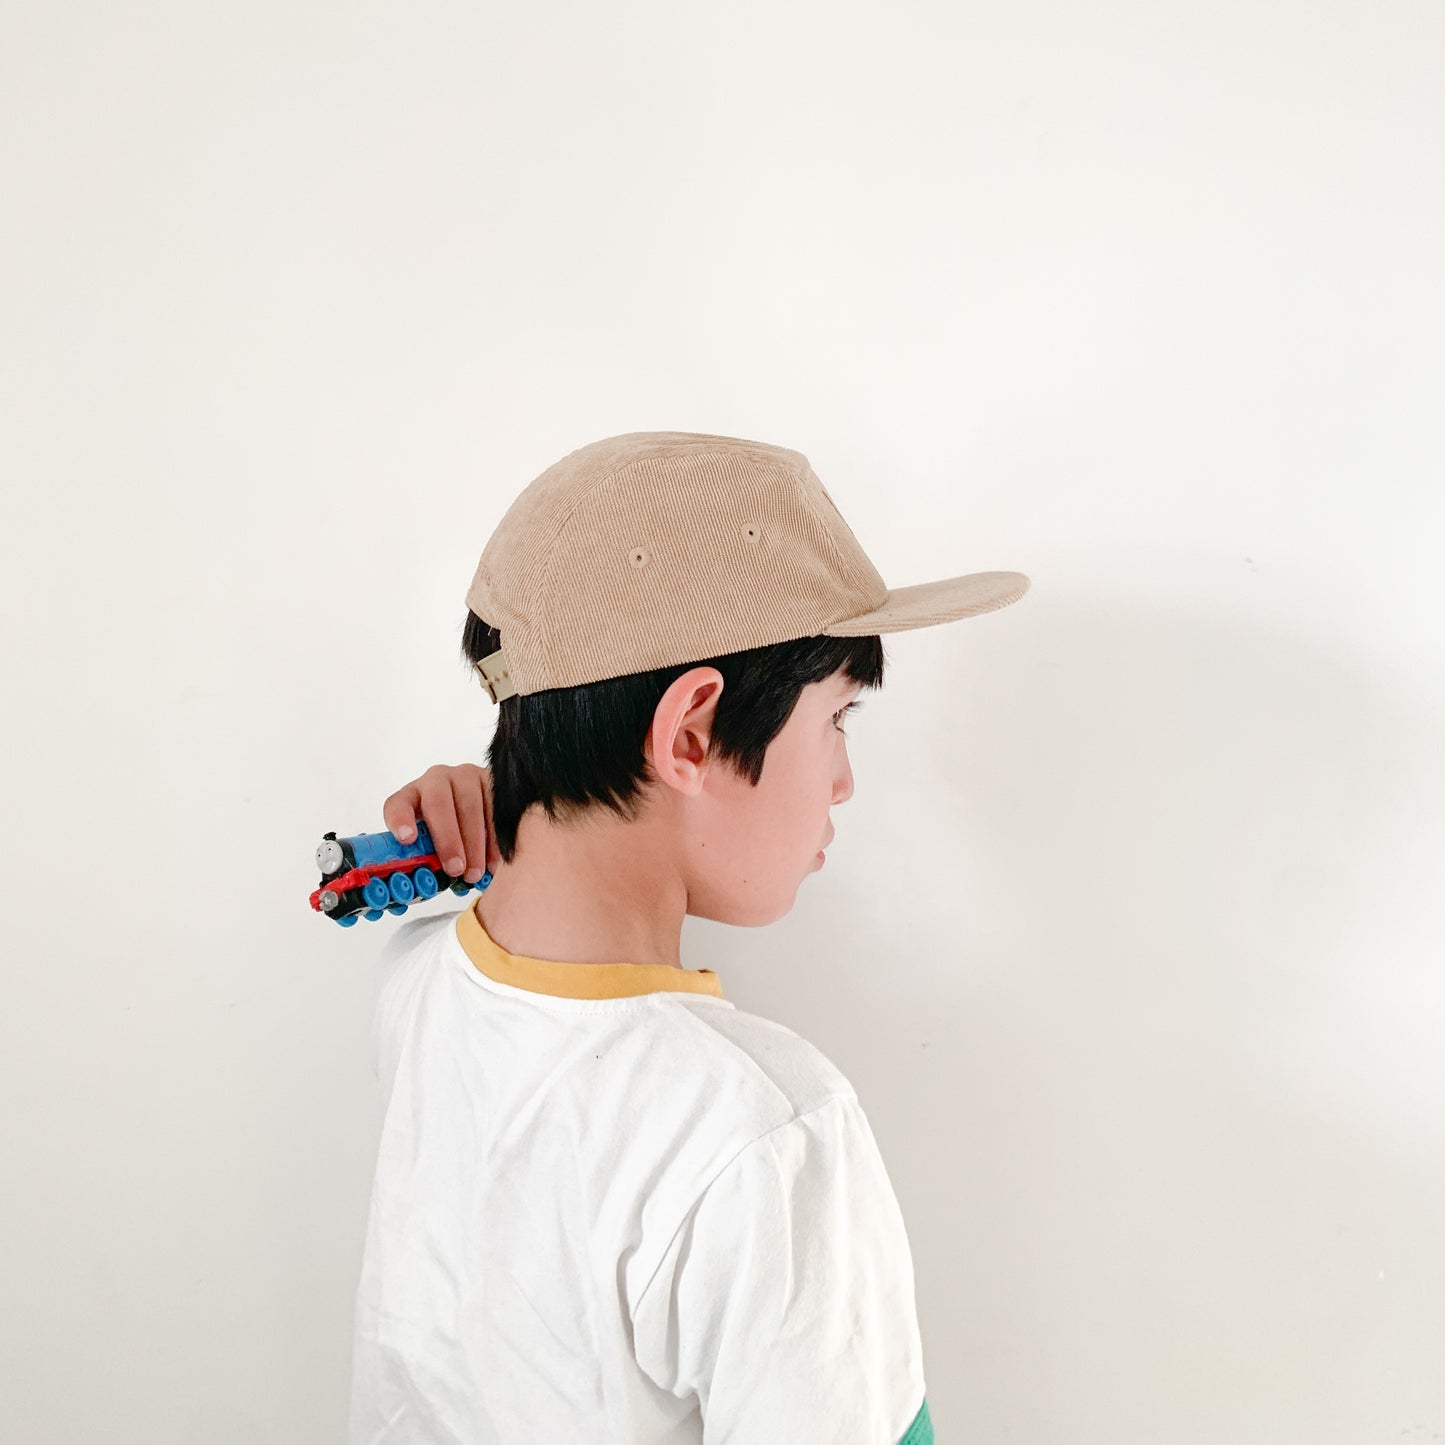 TODDLER AND KIDS 5 PANELS CORDUROY - BEIGE